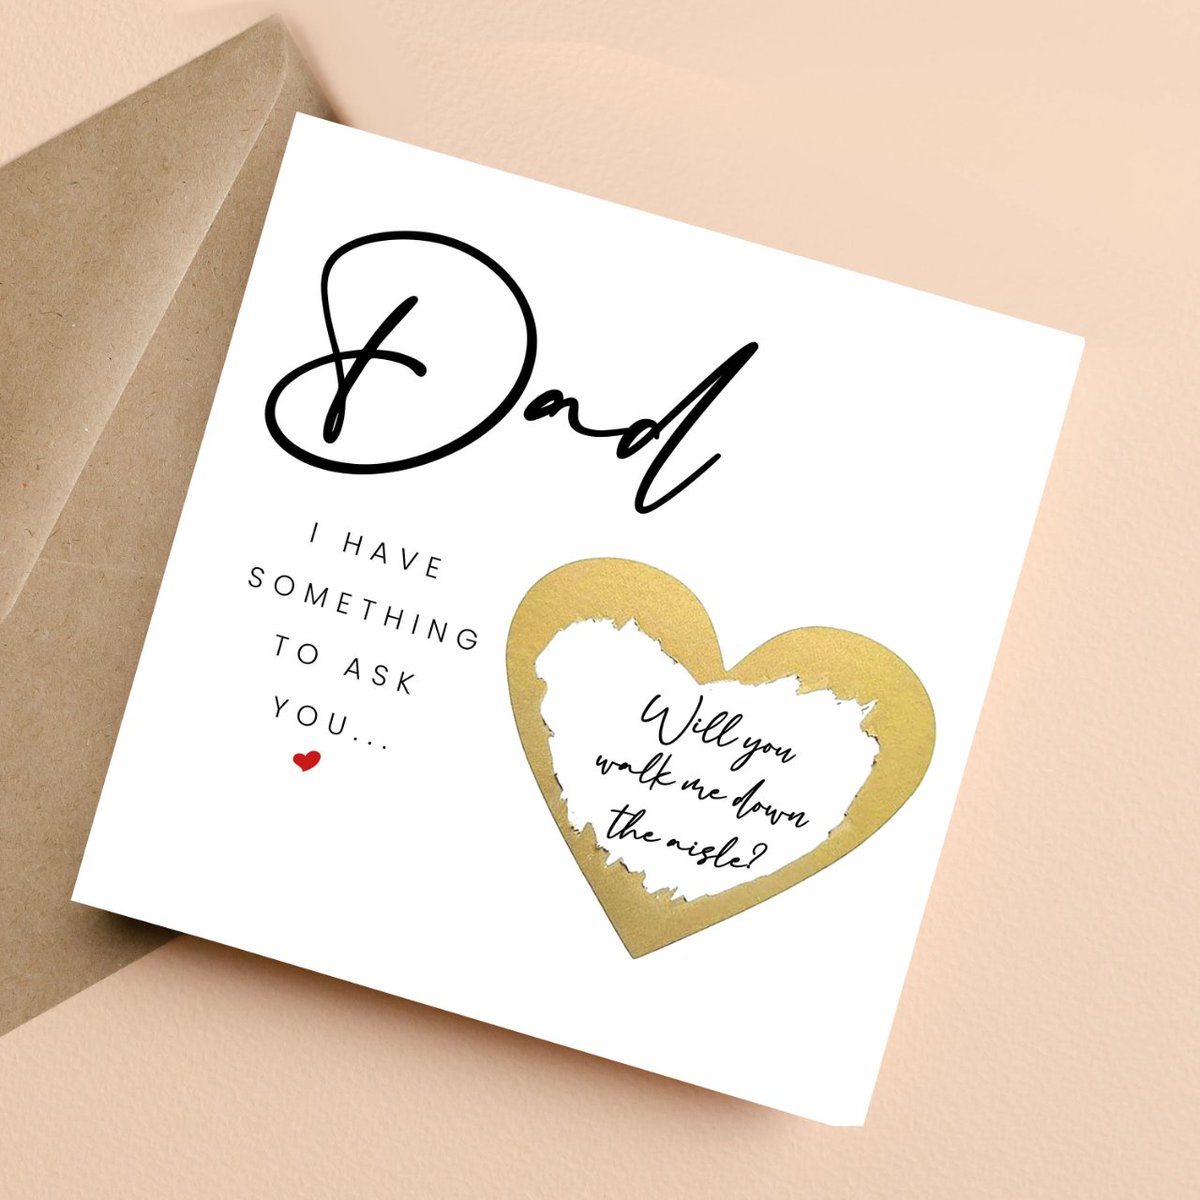 Scratch Reveal Card - Will You Walk Me Down The Aisle? 👰 etsy.me/3S0ILAu 🖱️ #ProposalCard #WeddingDay #DadWalkMeDownTheAisle #WalkMeDownTheAisle #PersonalisedCard #ScratchRevealCard #BeeyoutifulCards #BeeyoutifulGifts